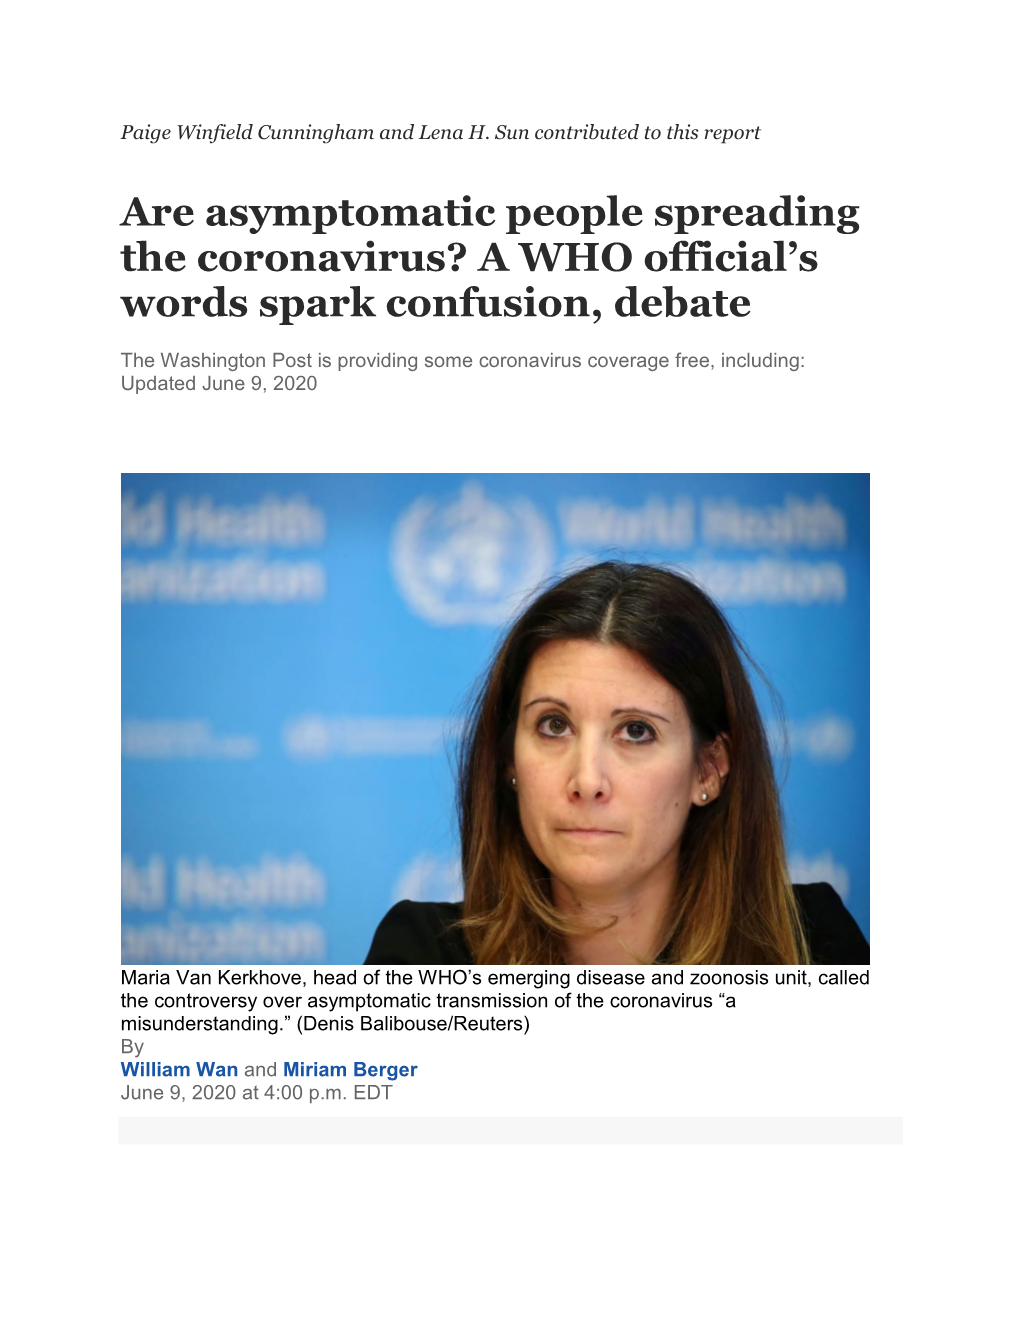 Are Asymptomatic People Spreading the Coronavirus? a WHO Official's